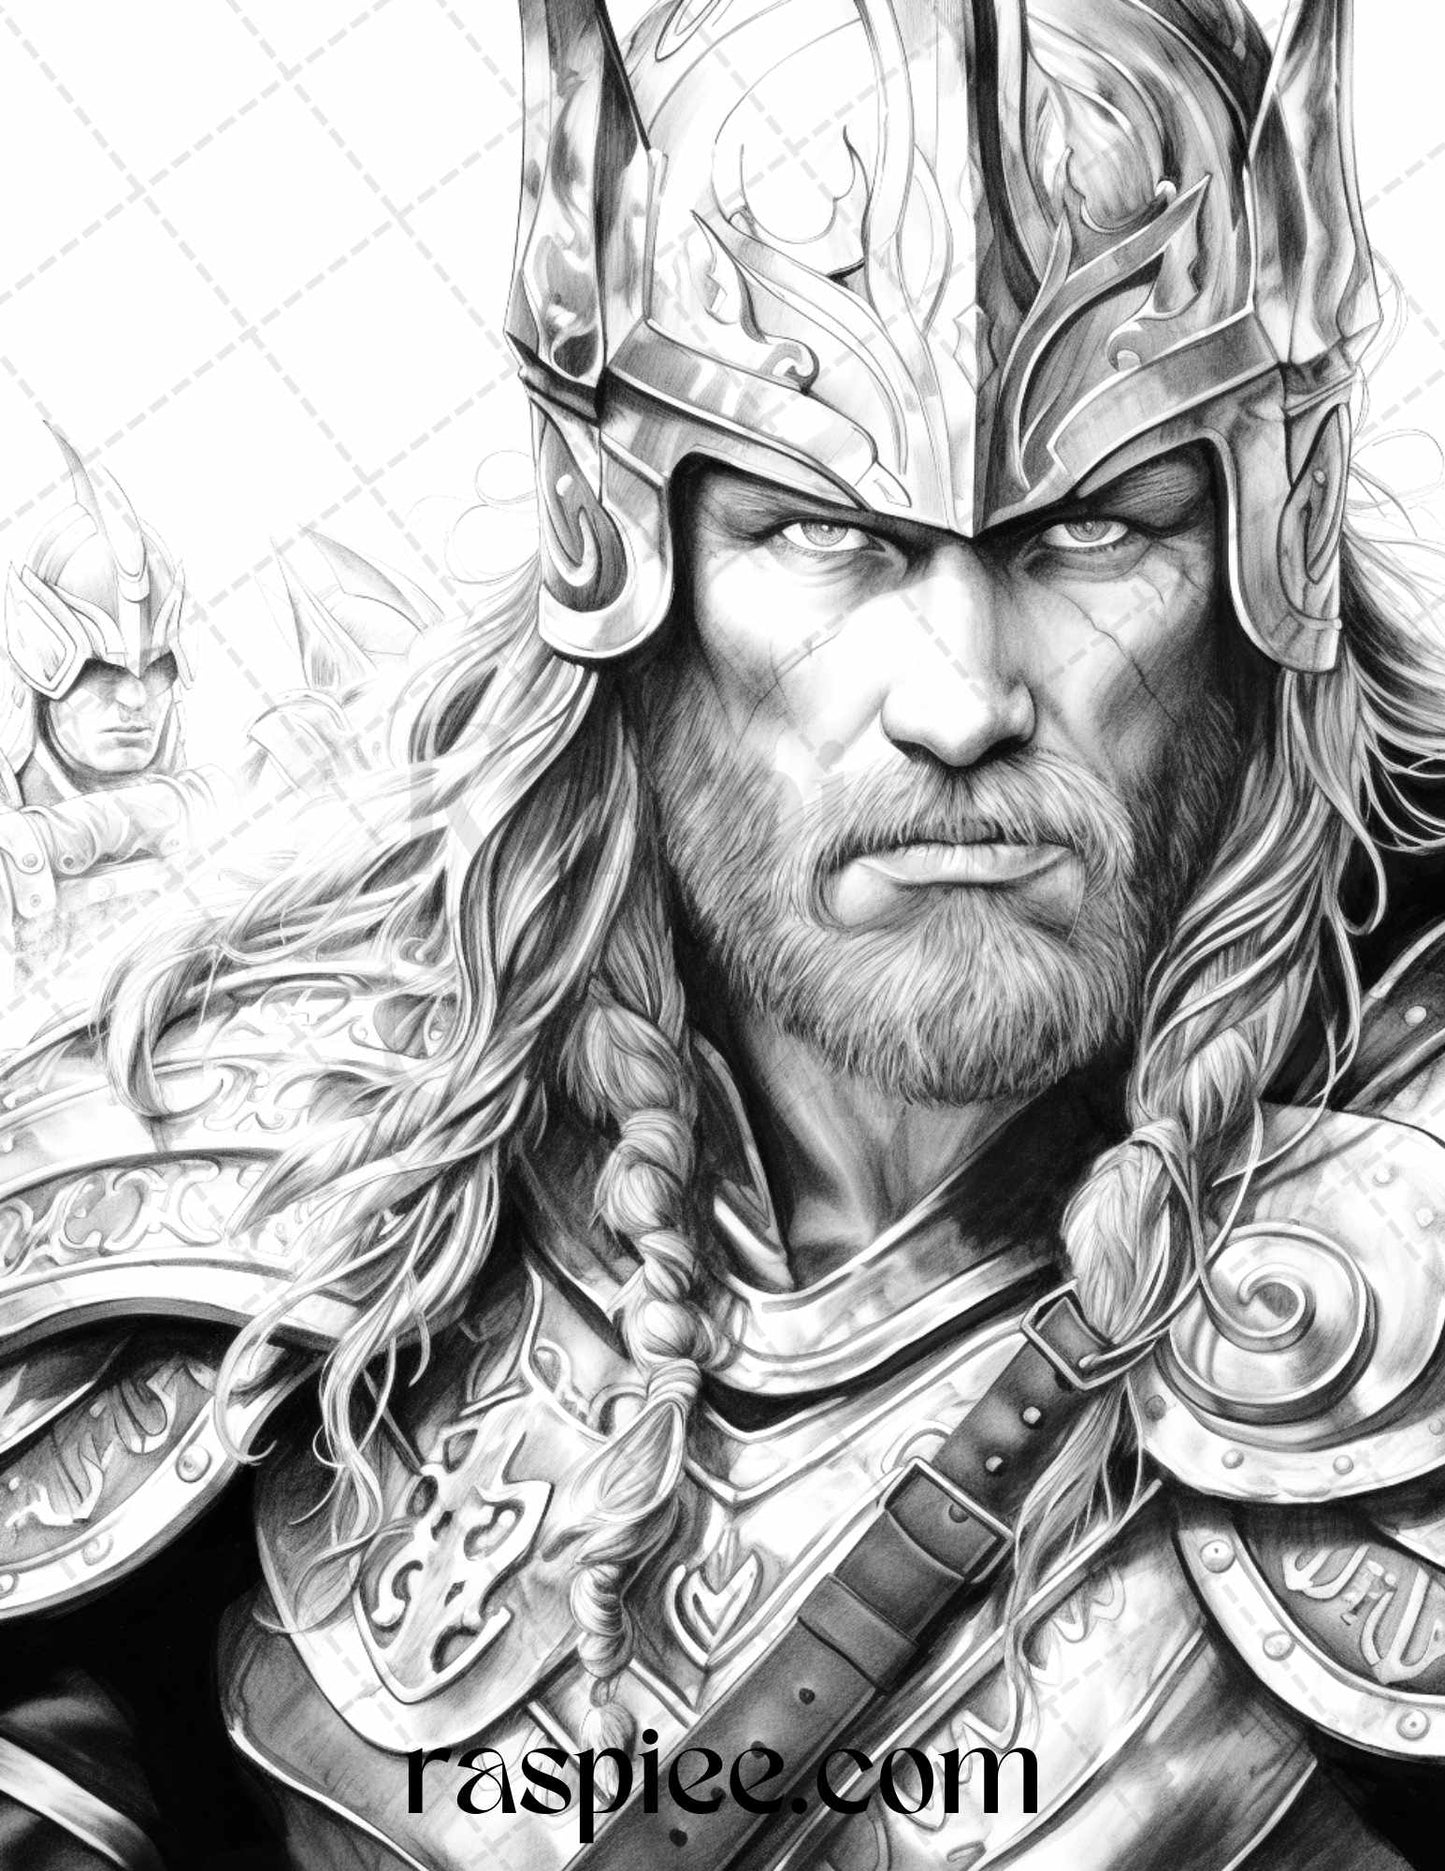 Viking warriors grayscale coloring page, Adult coloring printable of Viking art, Grayscale coloring image for stress relief, Mythical Nordic warriors coloring sheet, Detailed grayscale coloring design, Instant download Viking coloring page, Creative stress relief coloring sheet, Intricate grayscale art for coloring